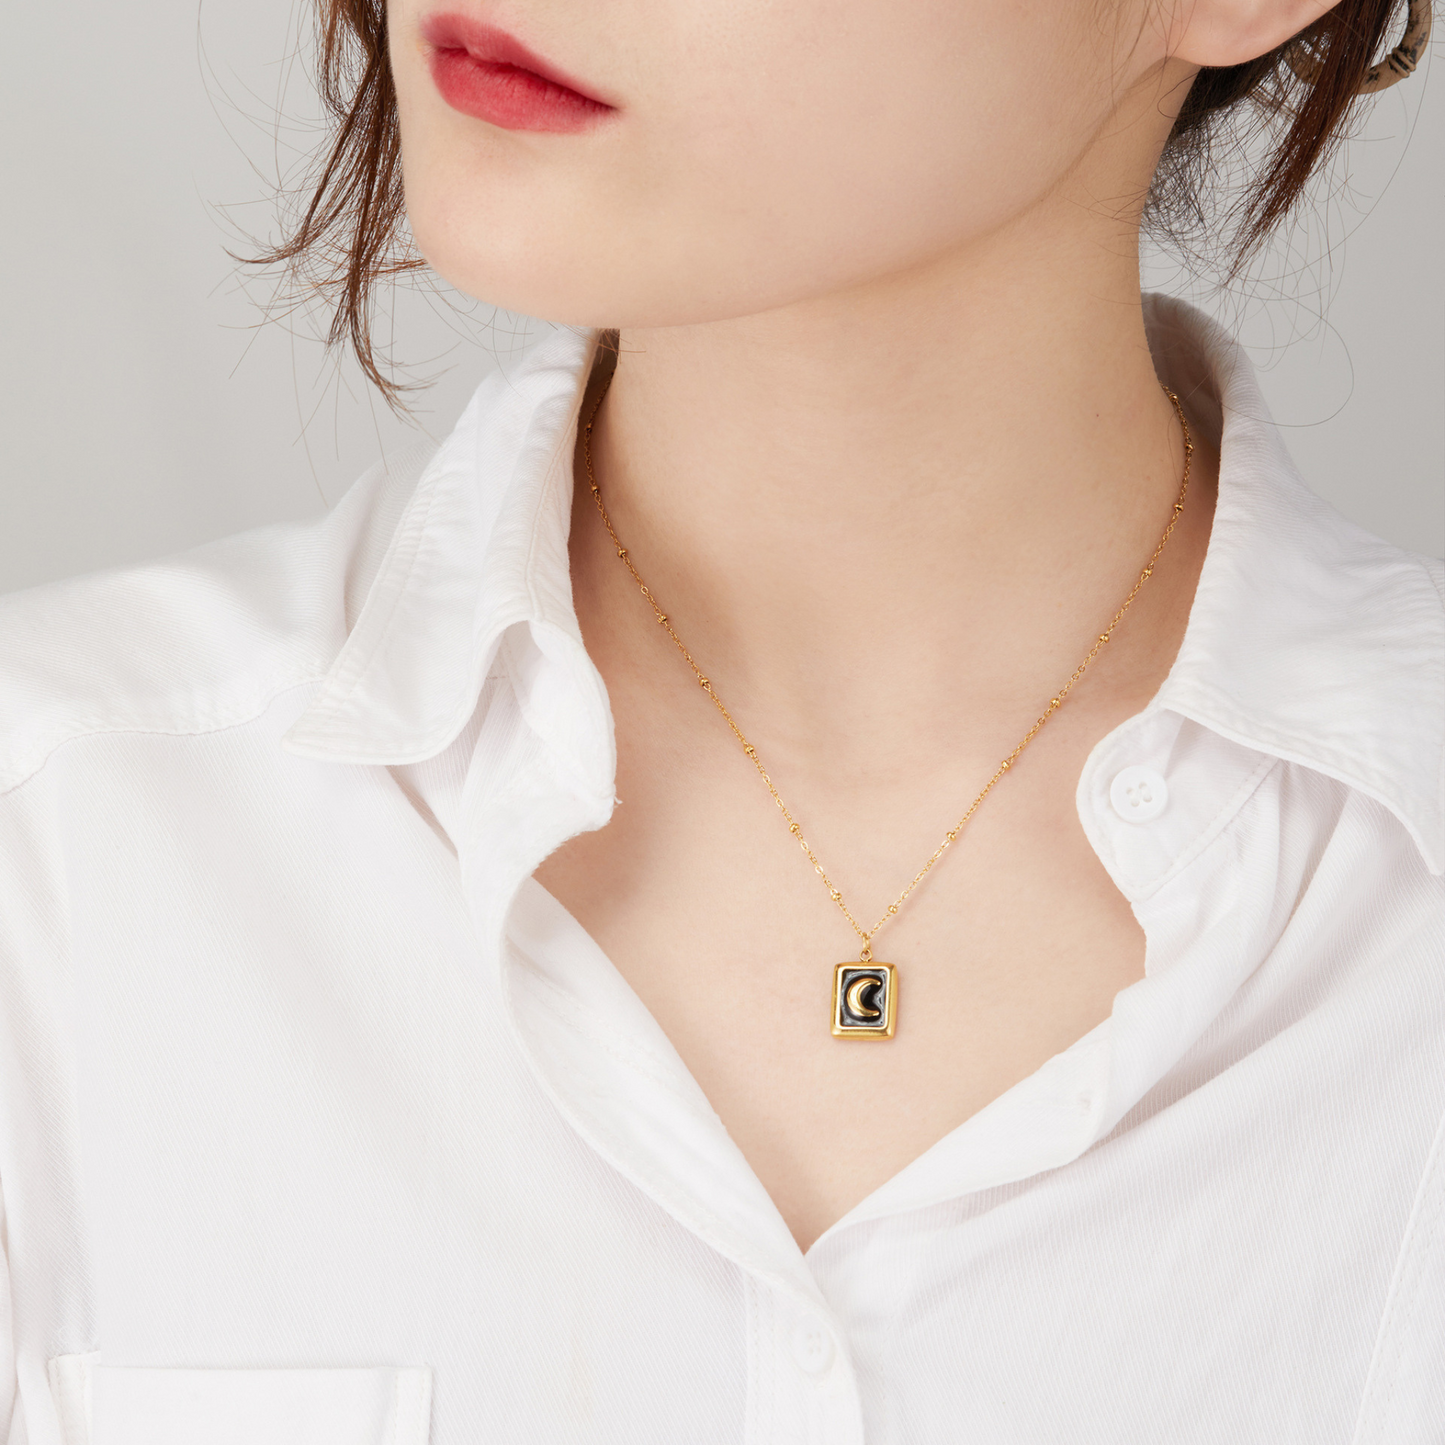 Minimalist Gold Chain Black Moon Necklace for Women